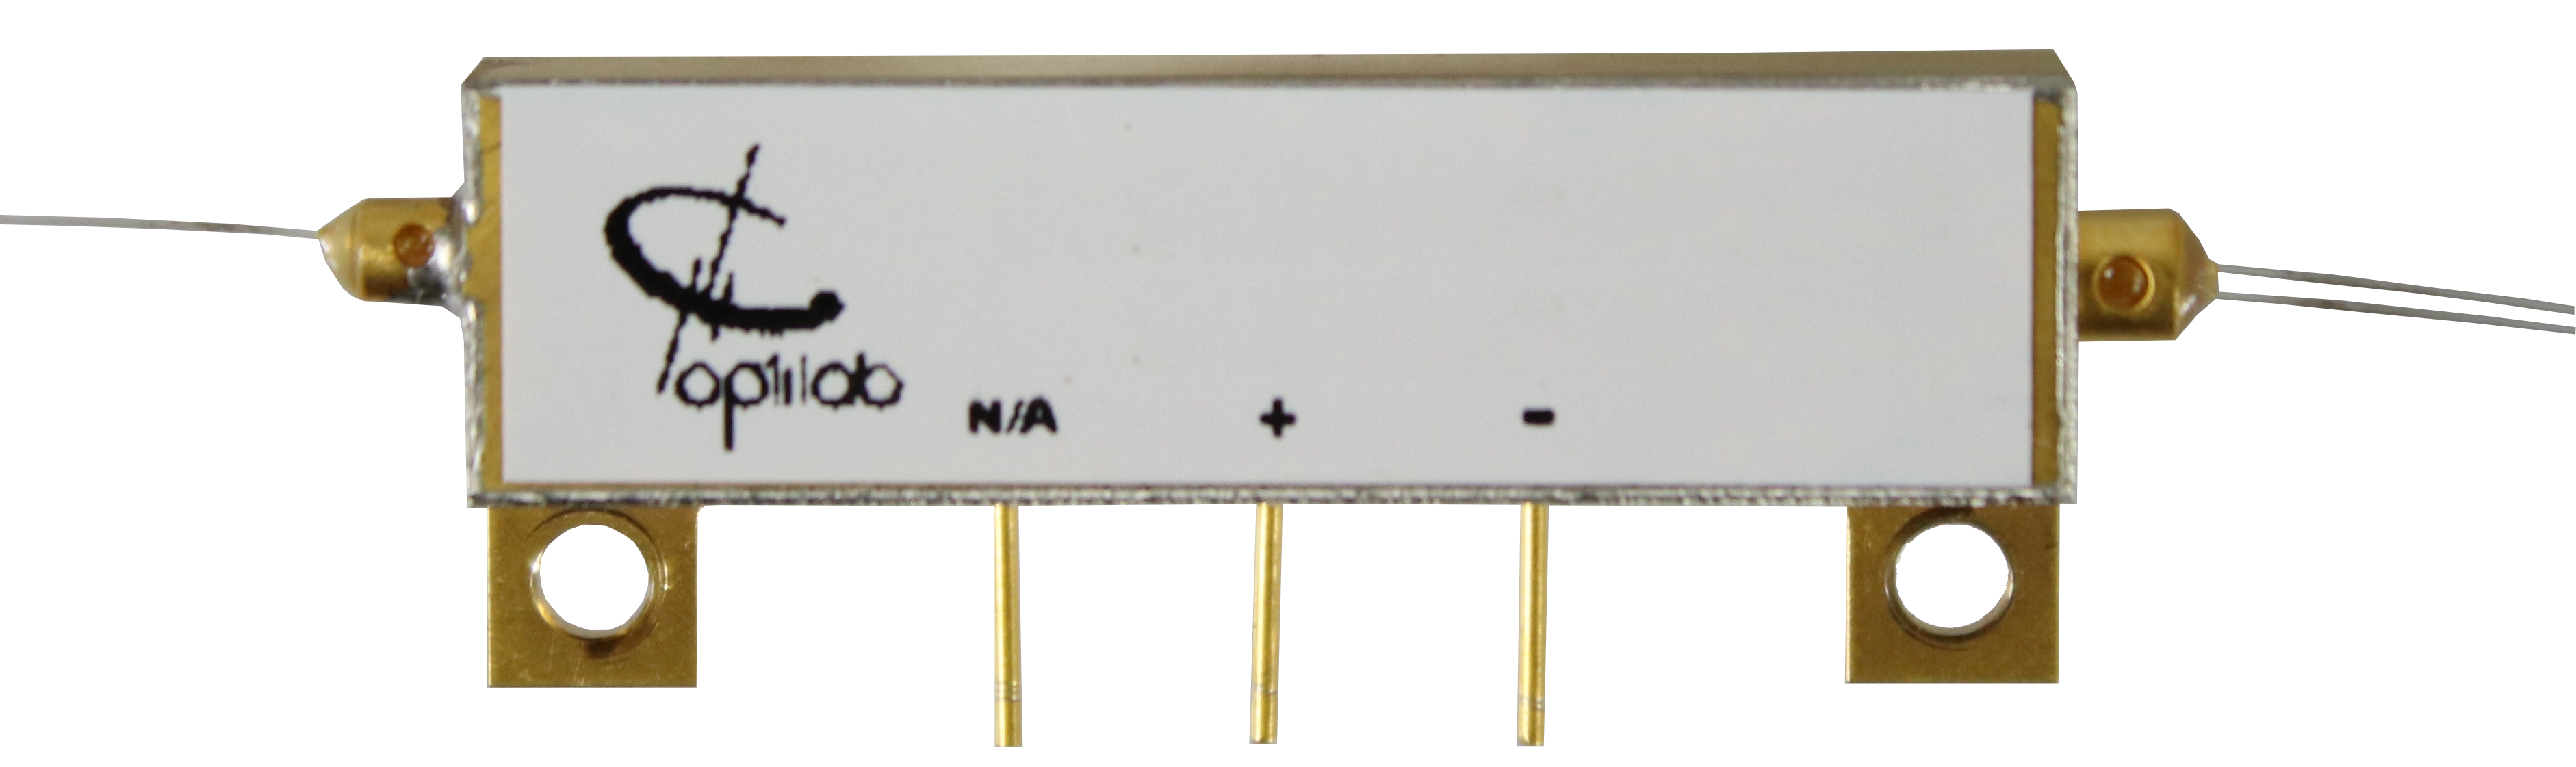 Multi-functional Integrated Optical Chip, Packaged, 1550 nm, 18 mm Chip Length, w/ PM Fiber Pigtails